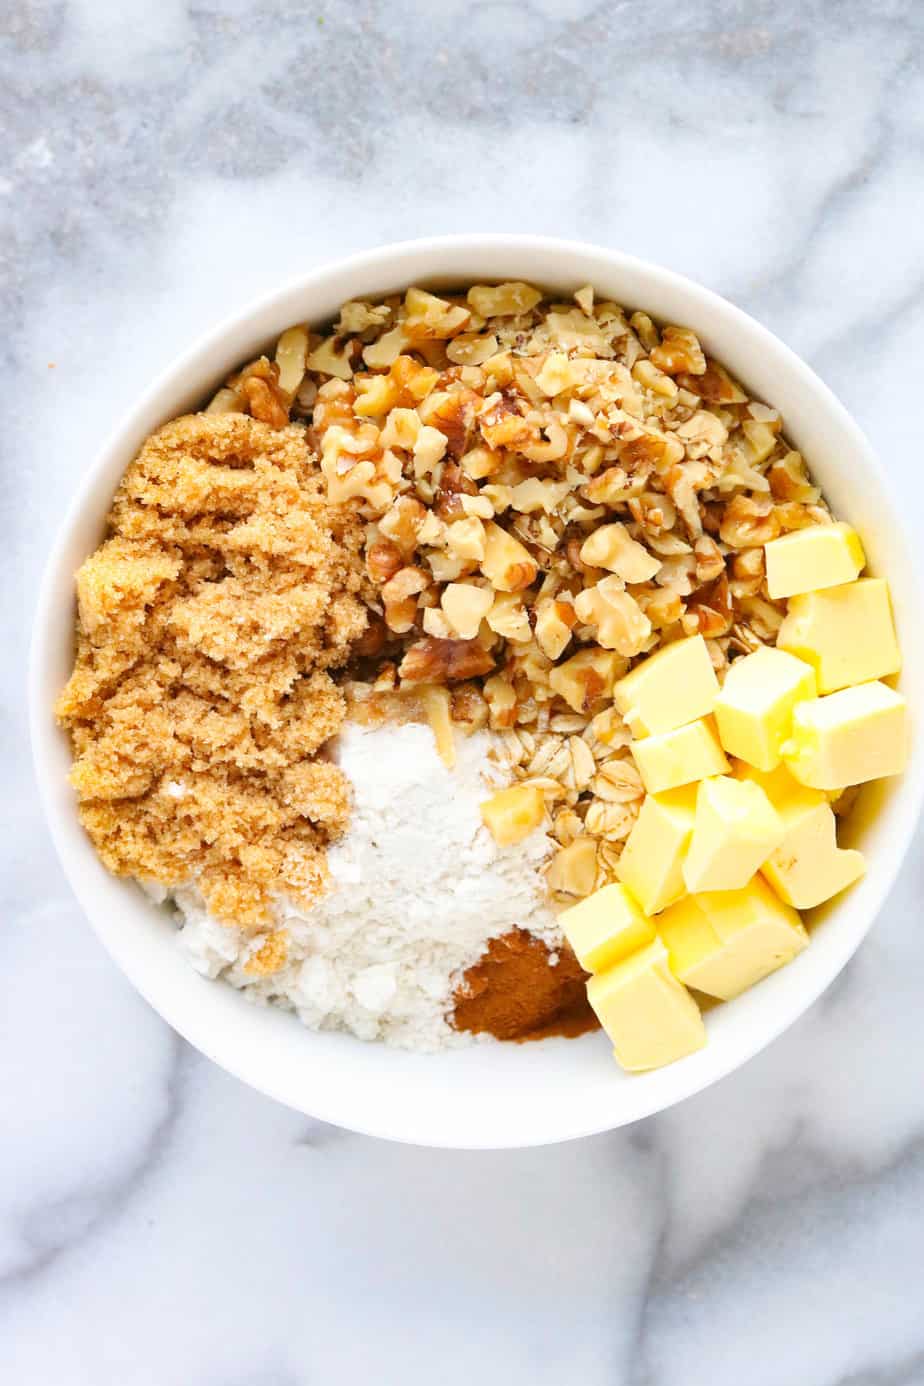 Nut and oat crumble topping ingredients in a white bowl